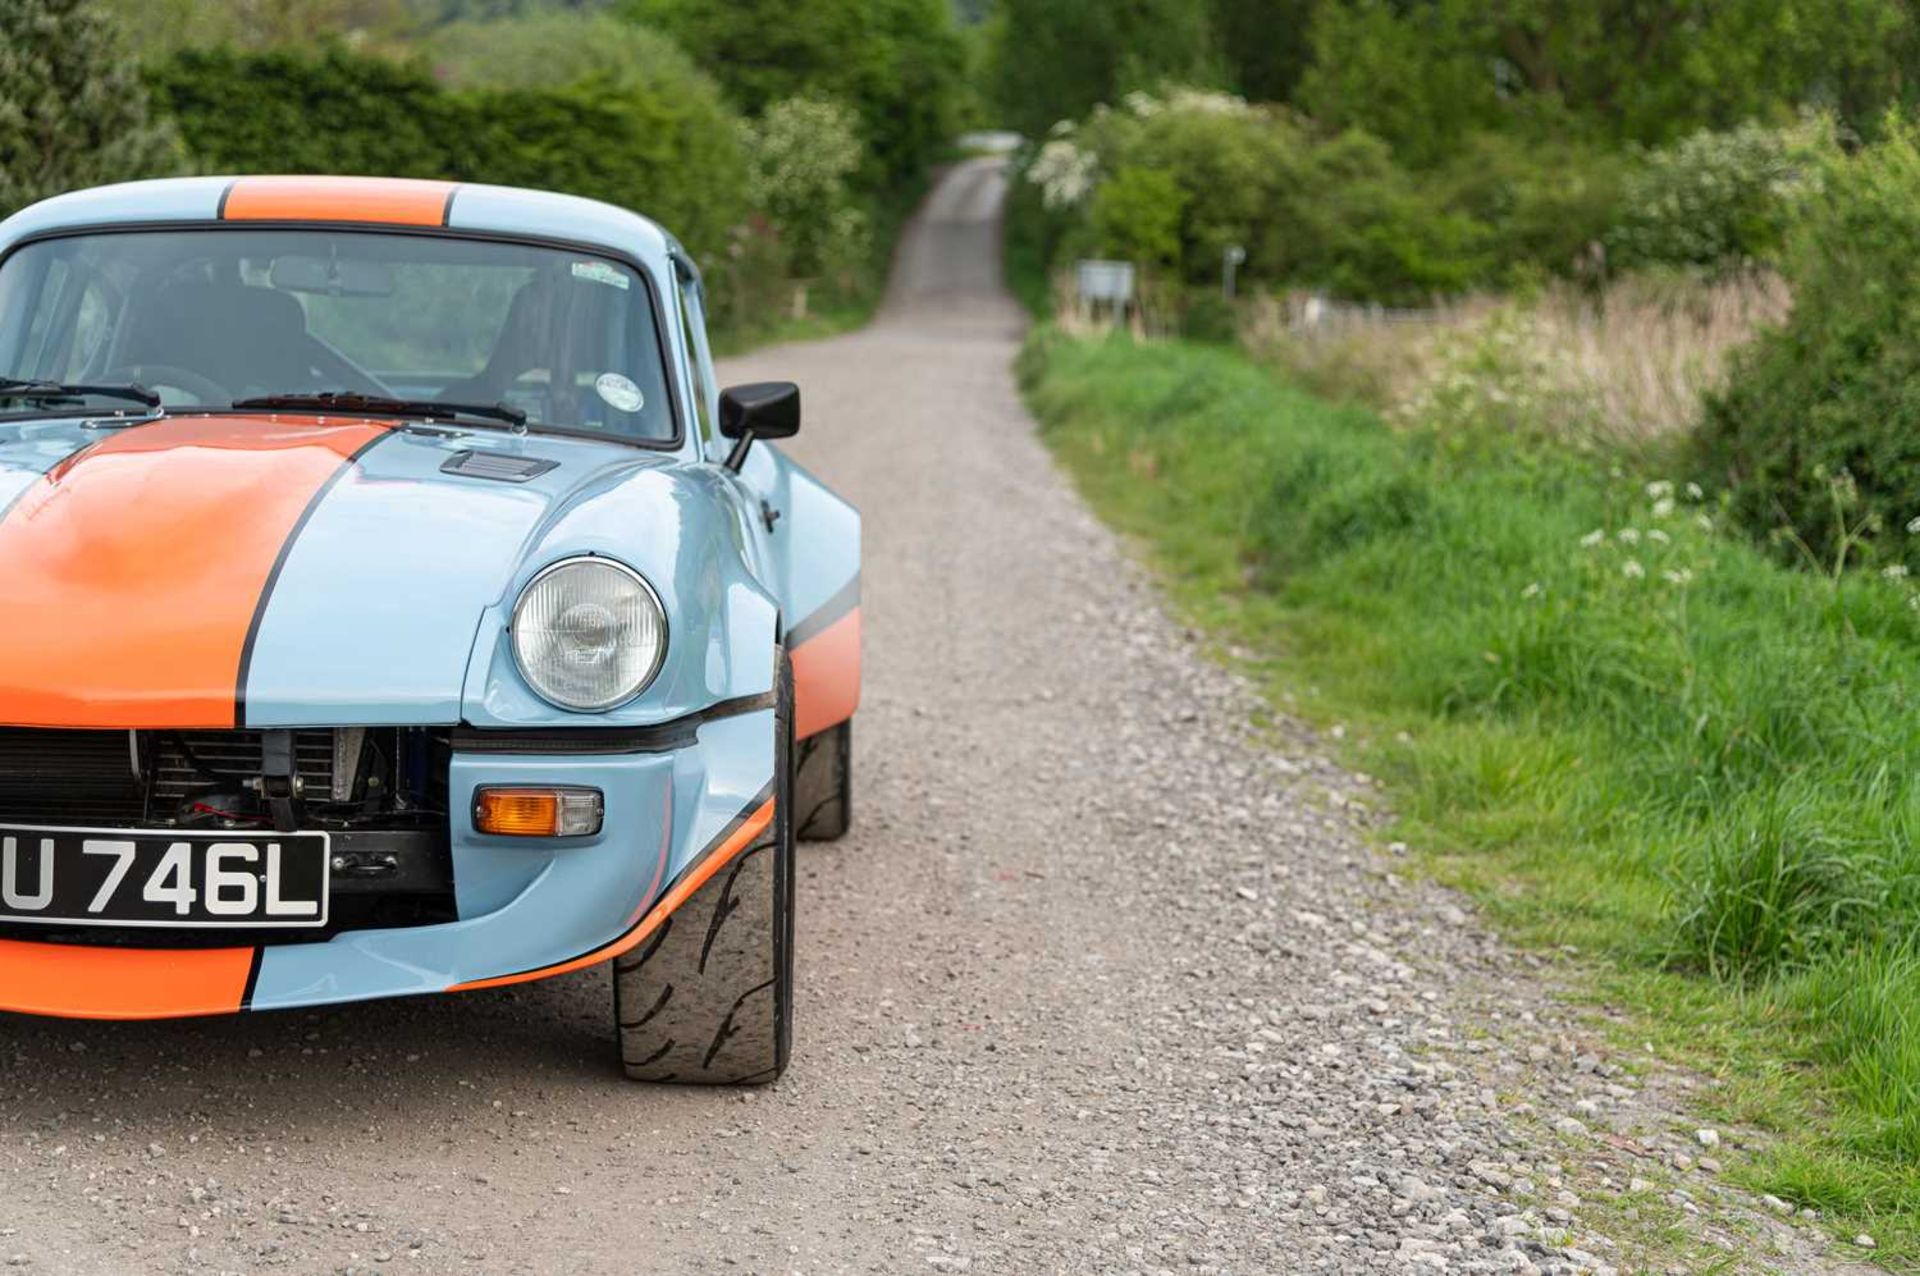 1973 Triumph GT6  ***NO RESERVE*** Presented in Gulf Racing-inspired paintwork, road-going track wea - Image 5 of 65